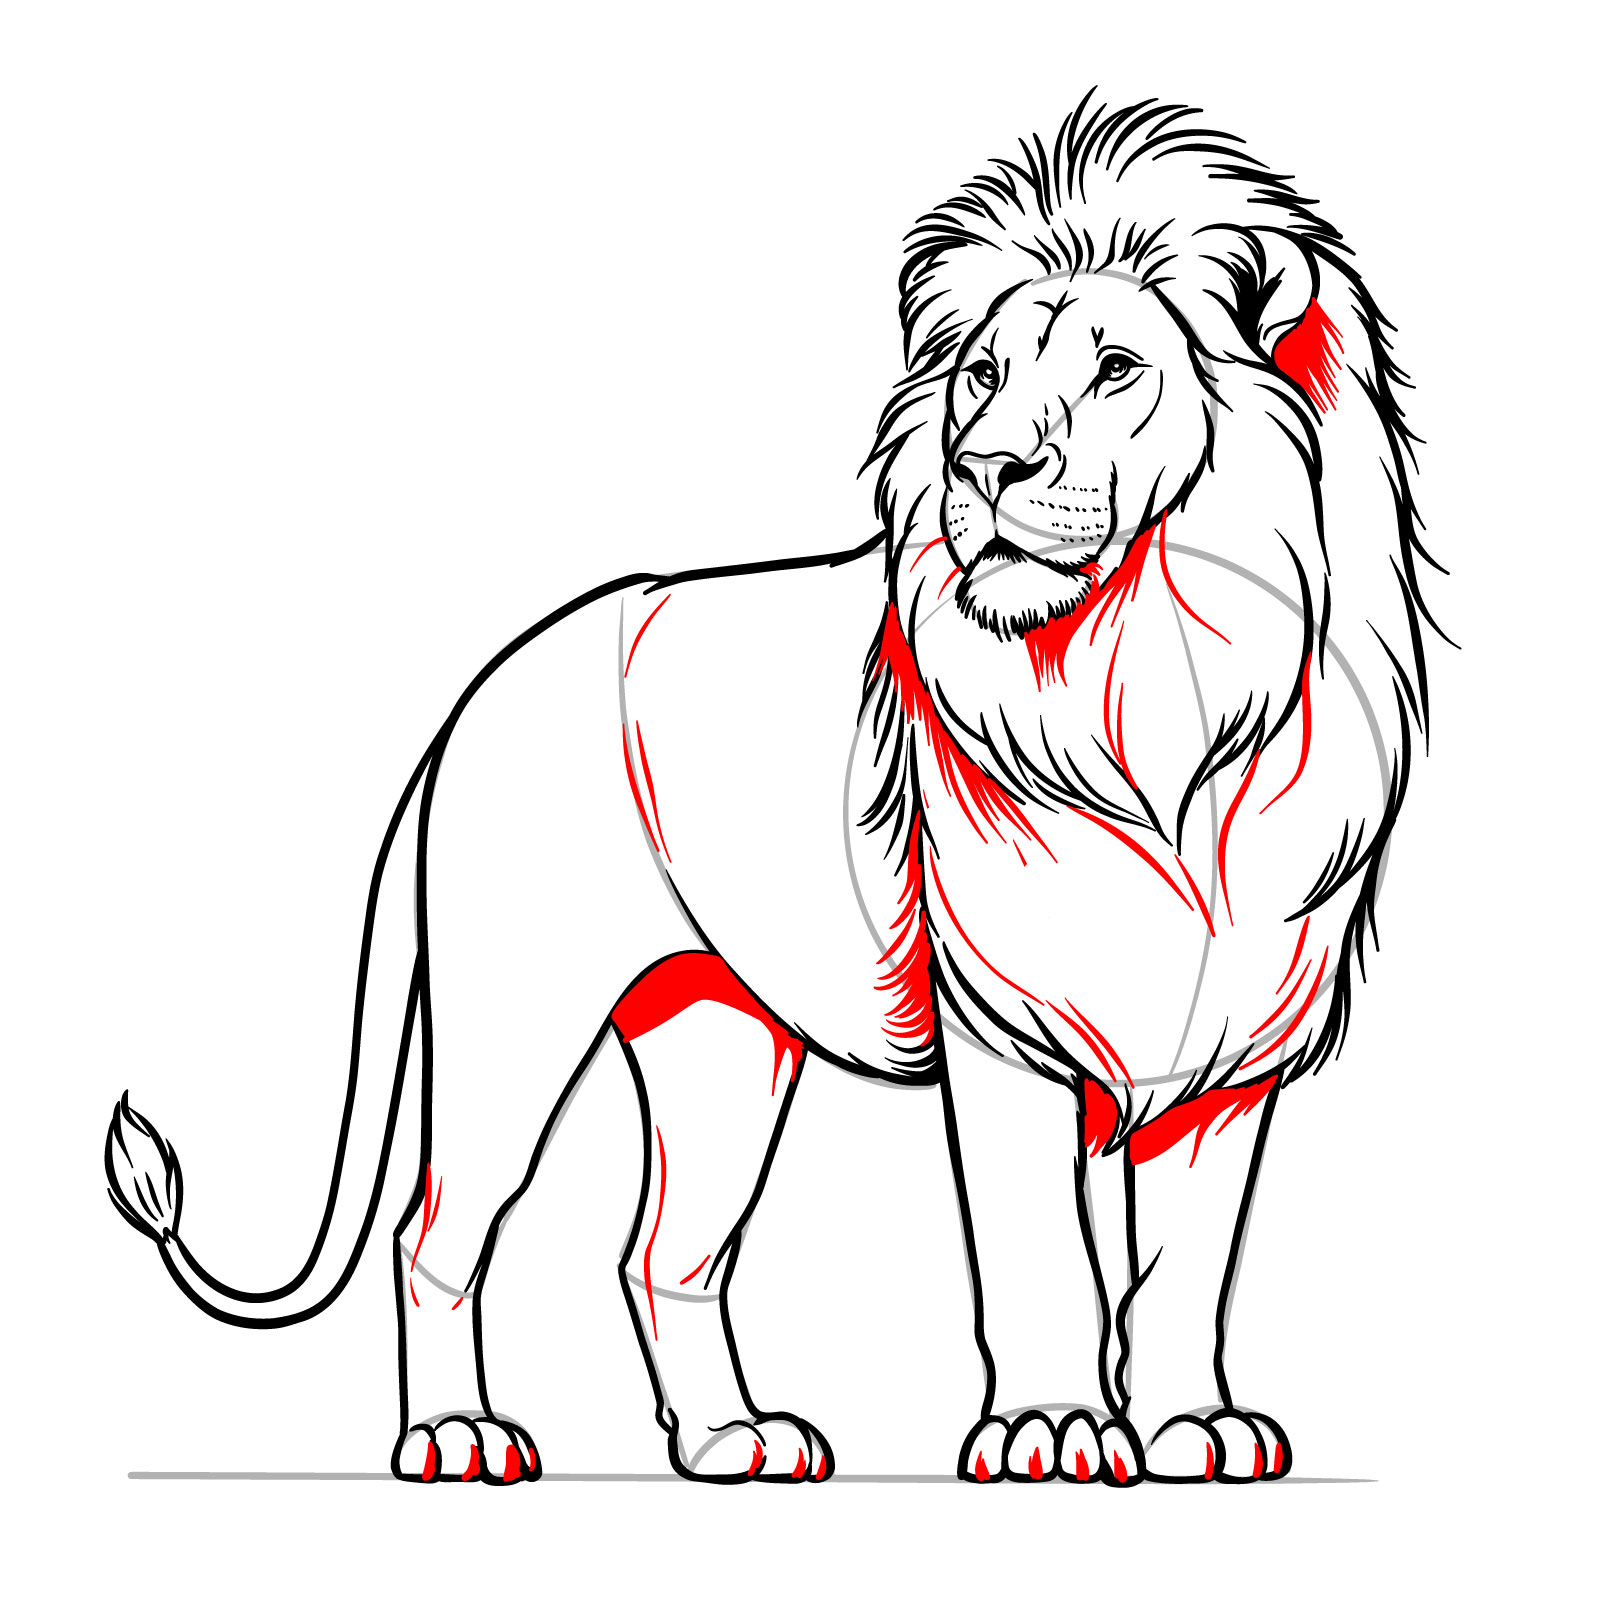 Refining a standing lion drawing with small details and shading techniques - step 14